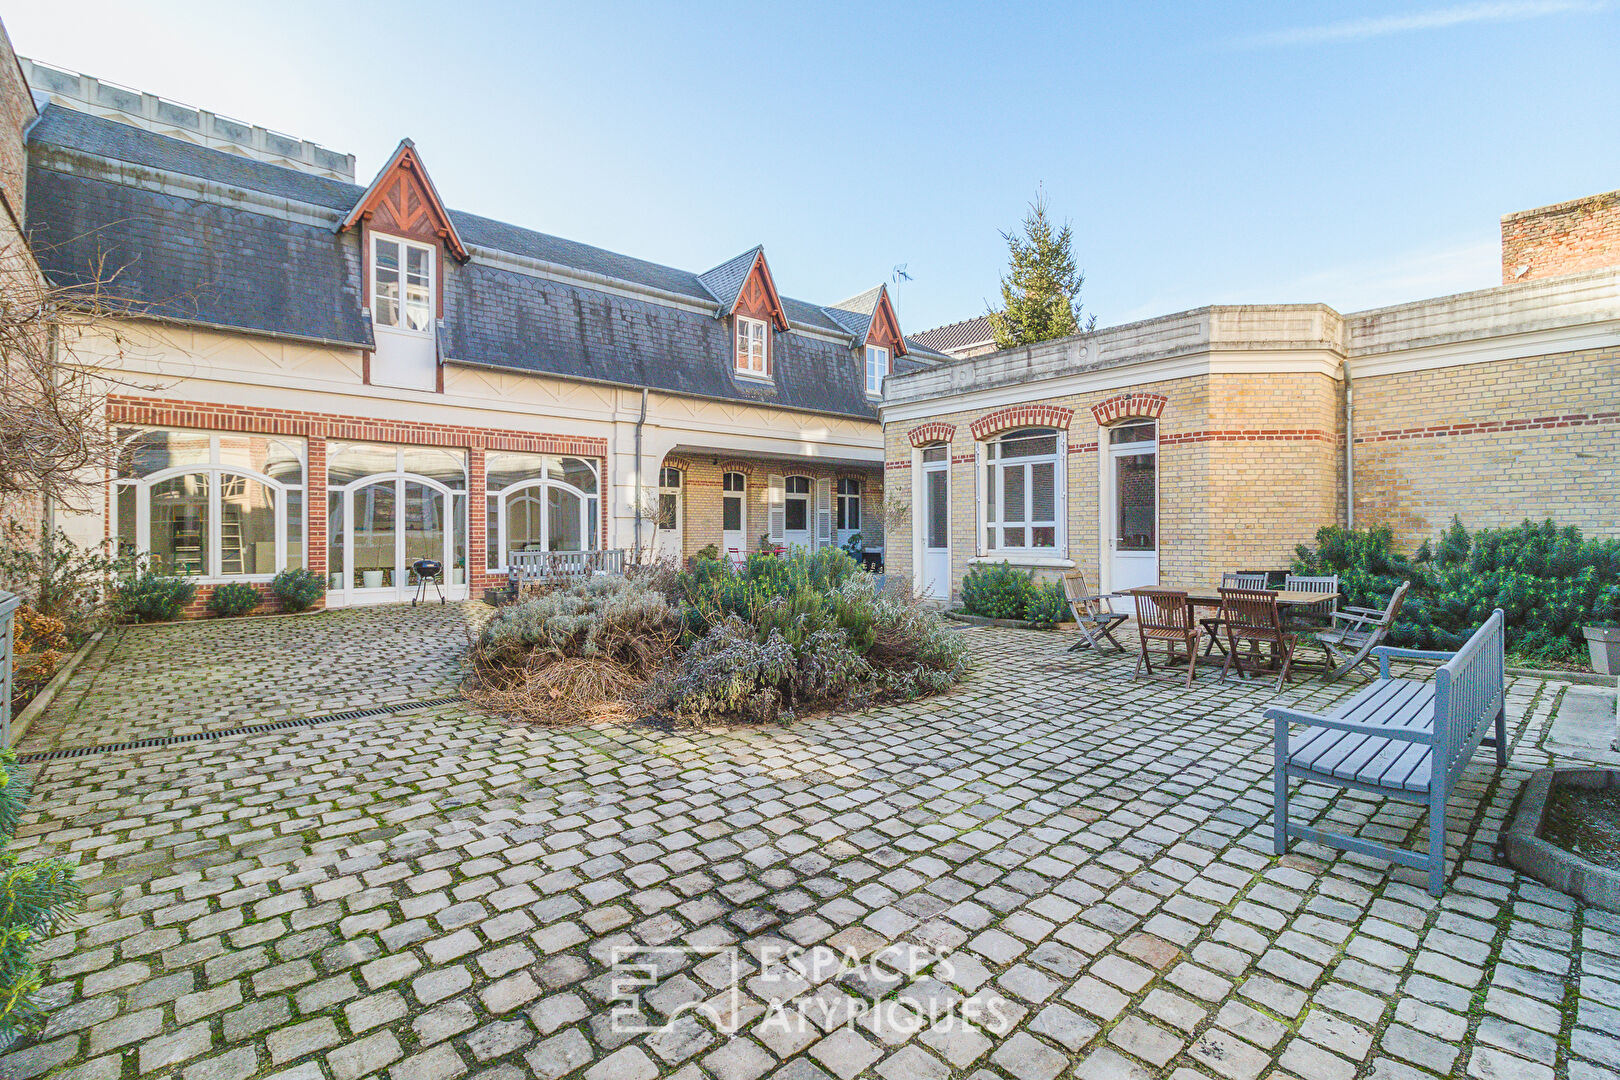 Beautiful bourgeois residence and its guest rooms near the town center of Amiens south